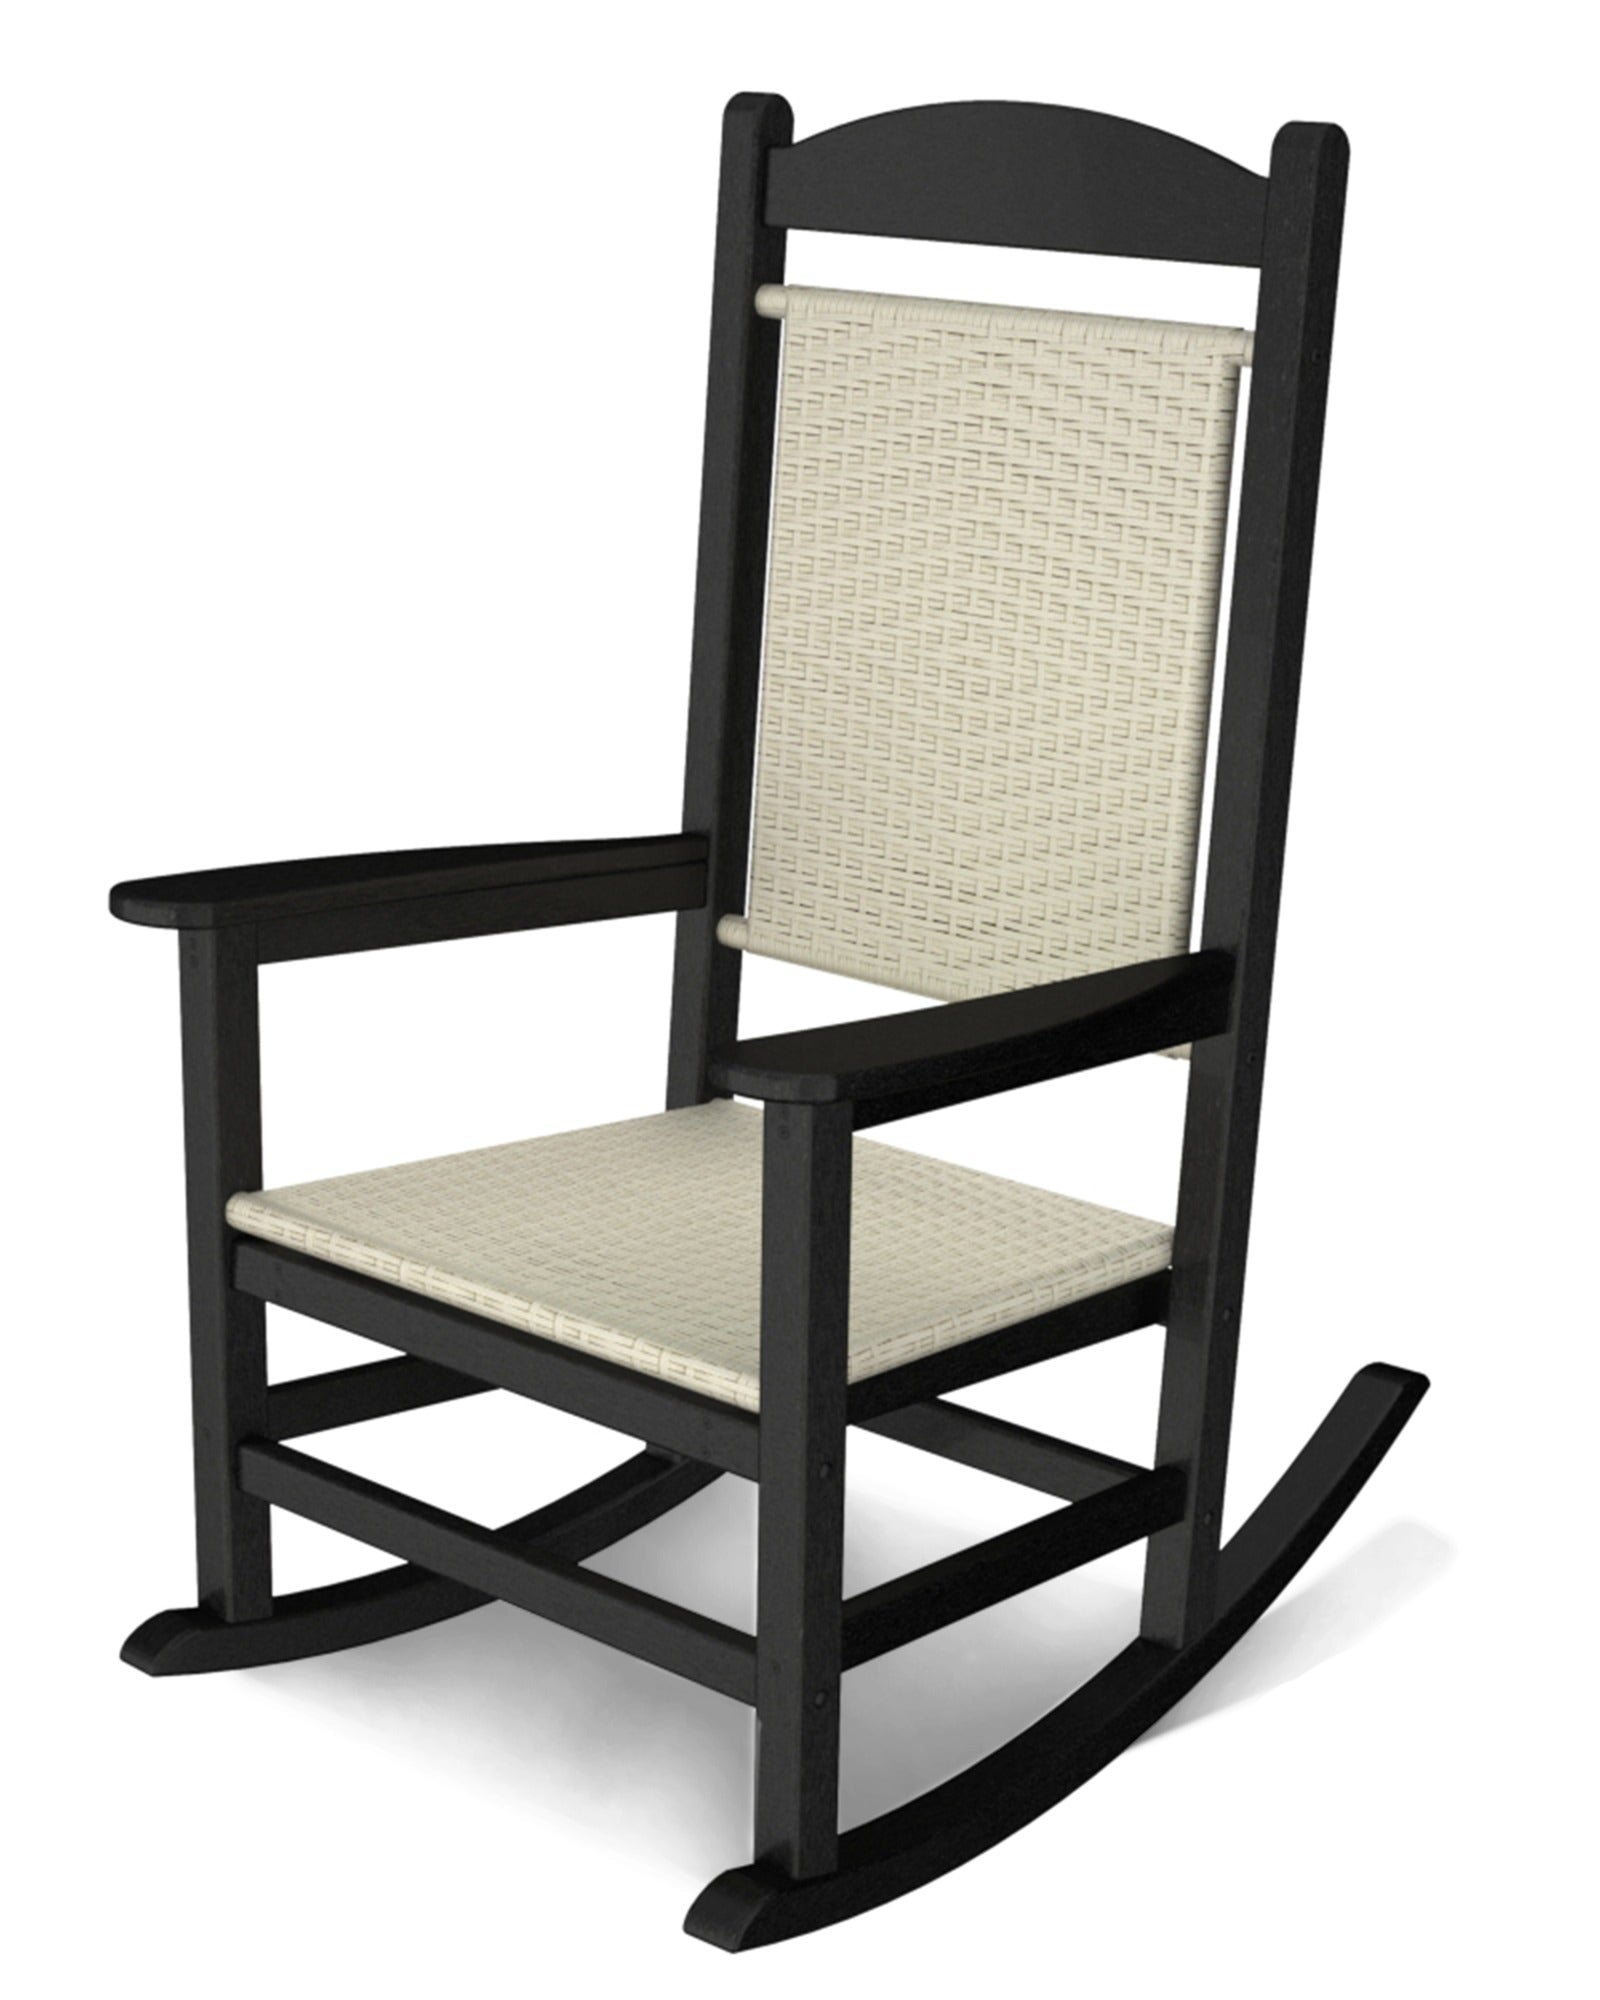 Polywood Presidential Woven Rocking Chair with Black Frame and White Loom 12031450